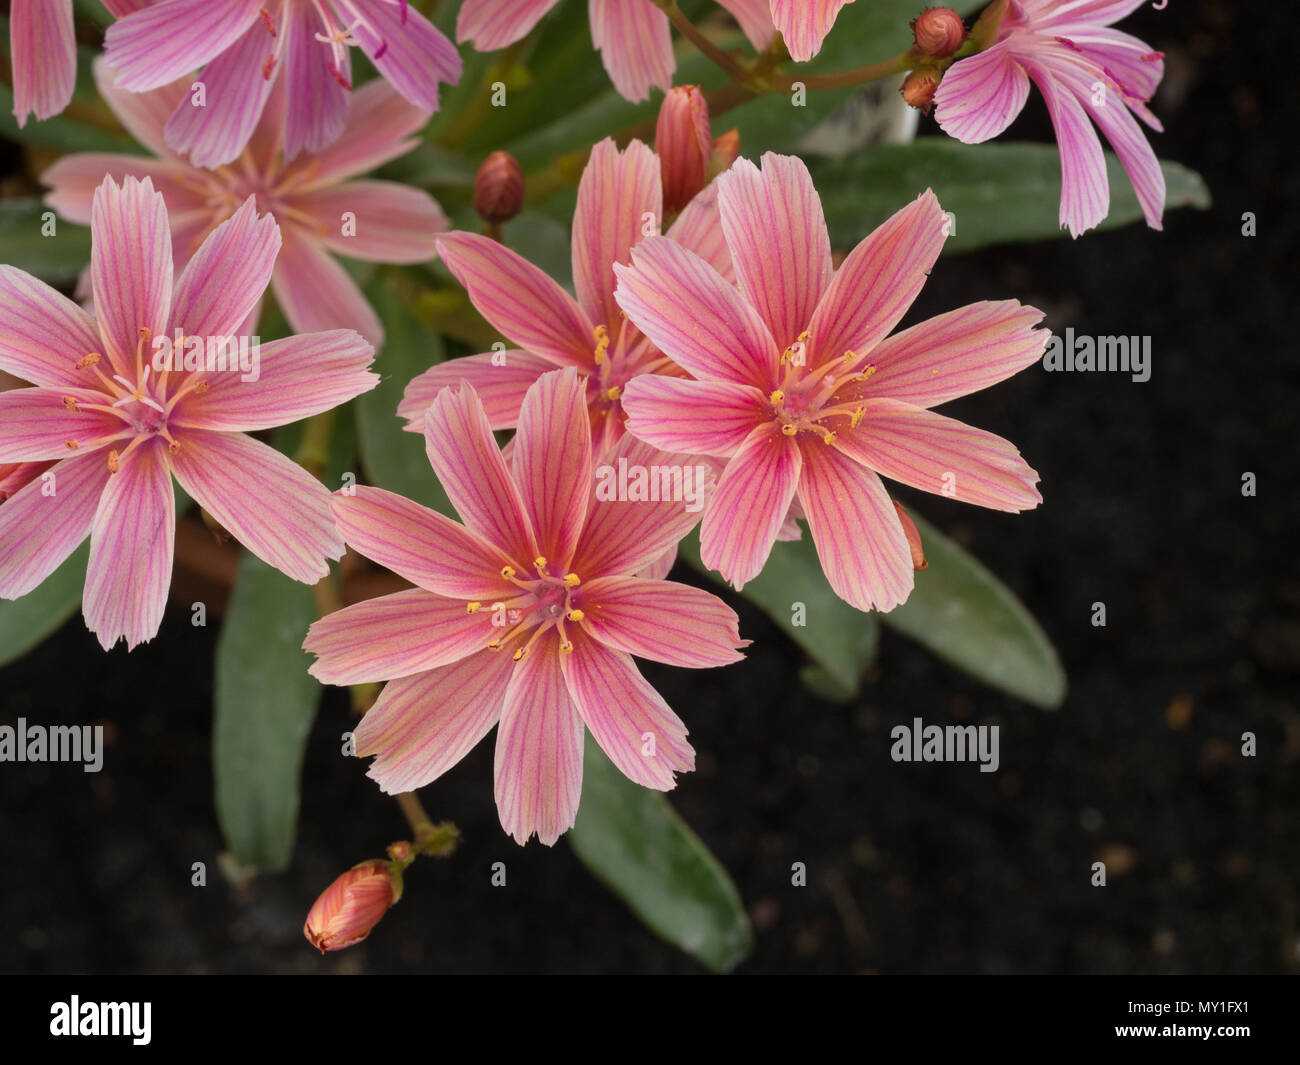 A group of striped flowers of Lewisia Little Plum Stock Photo